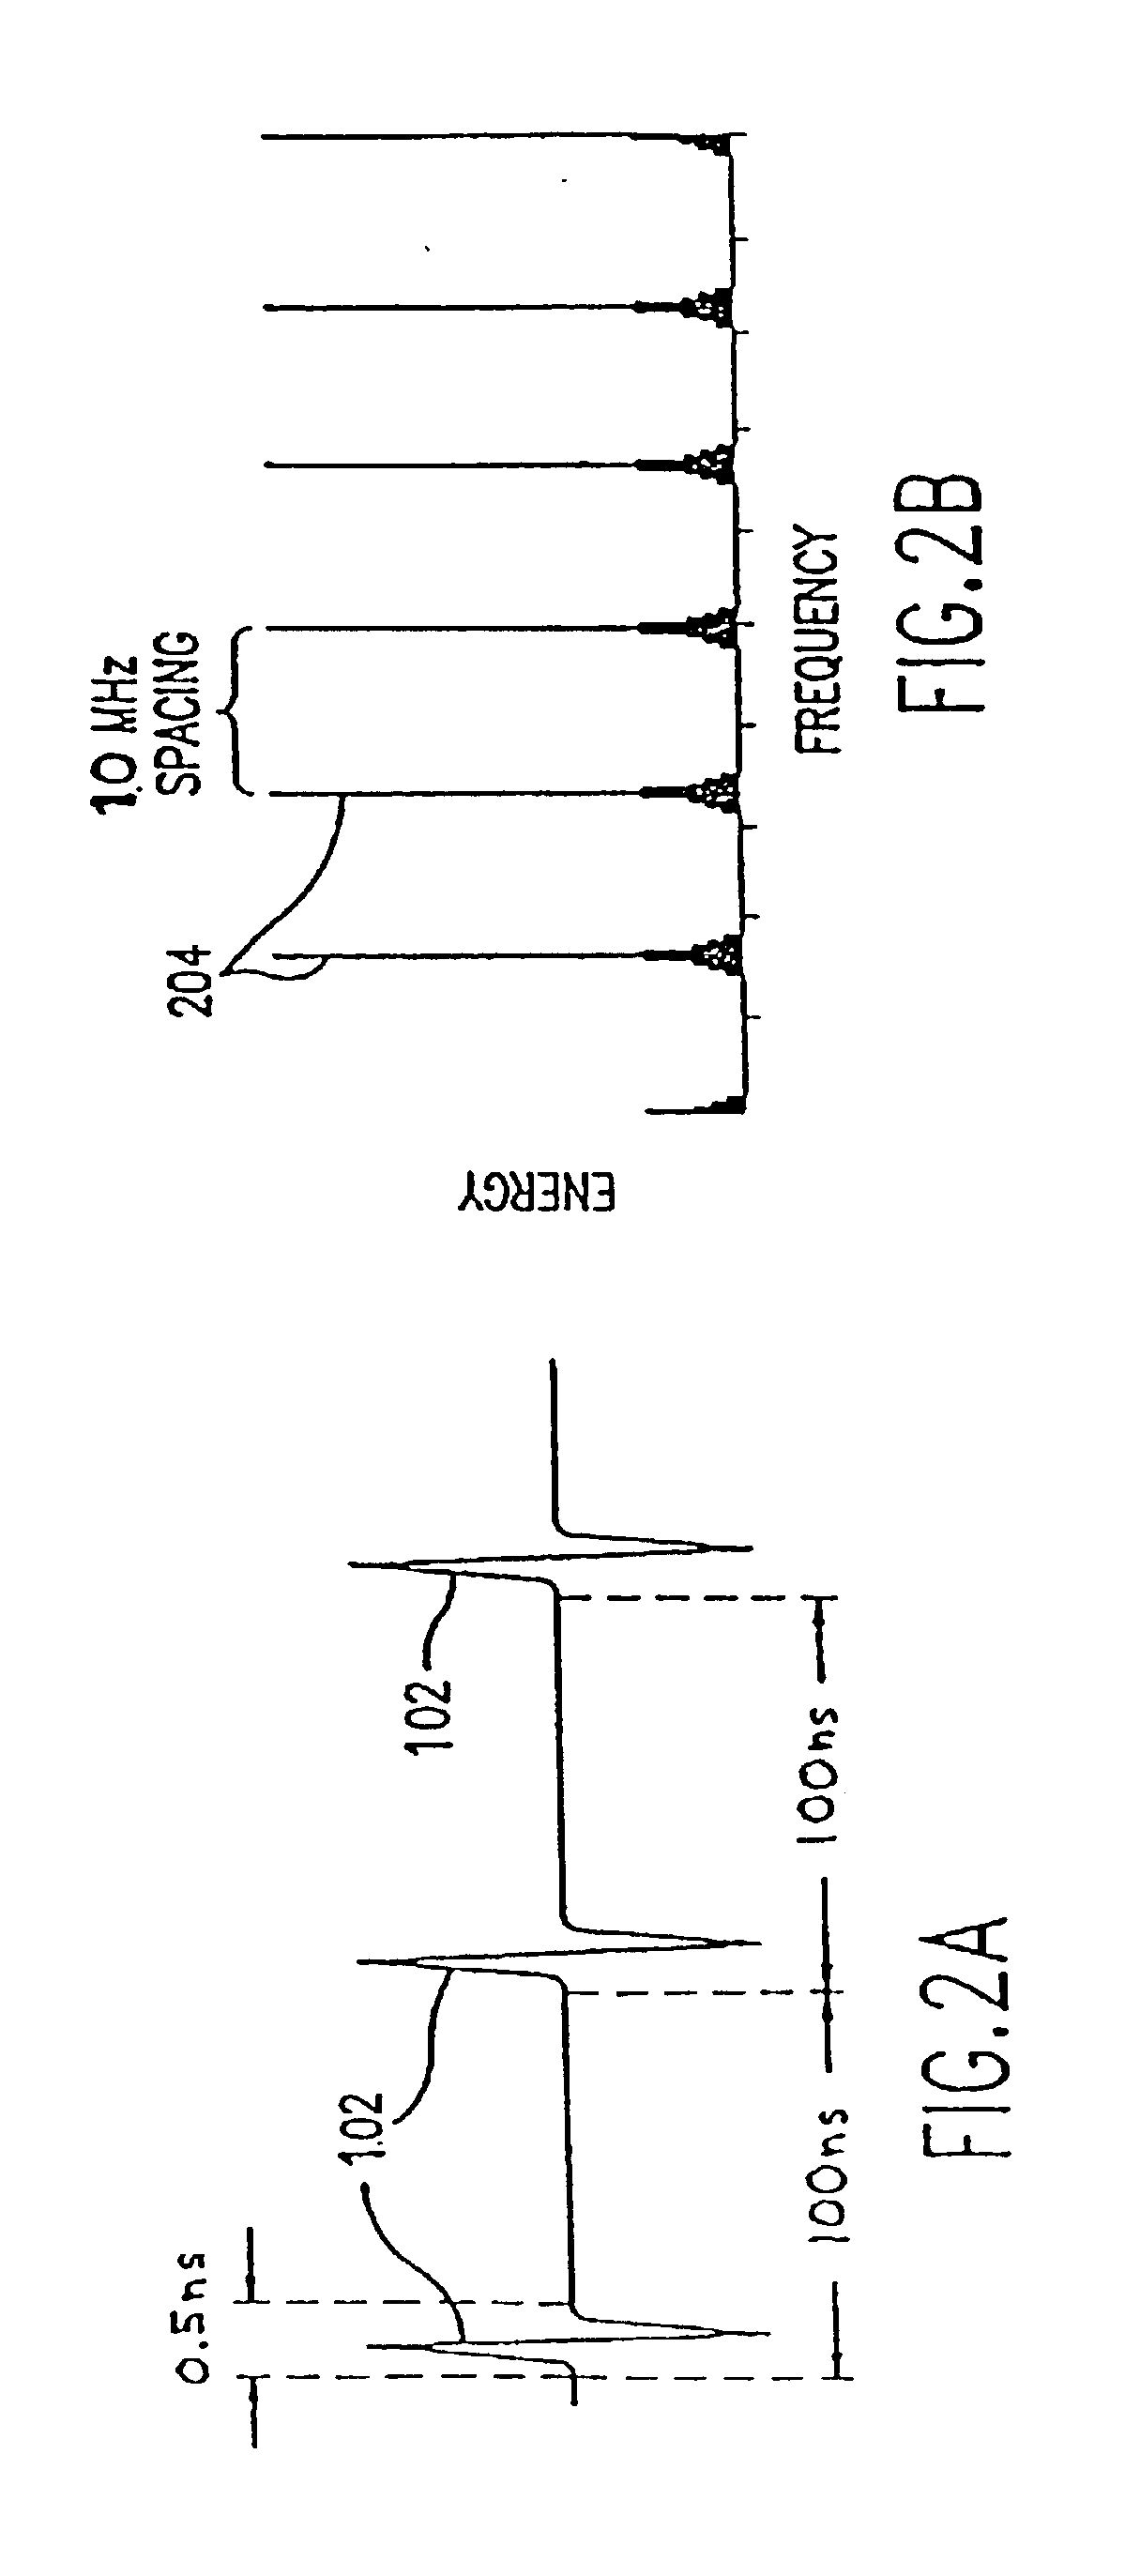 System and method for monitoring assets, objects, people and animals utilizing impulse radio